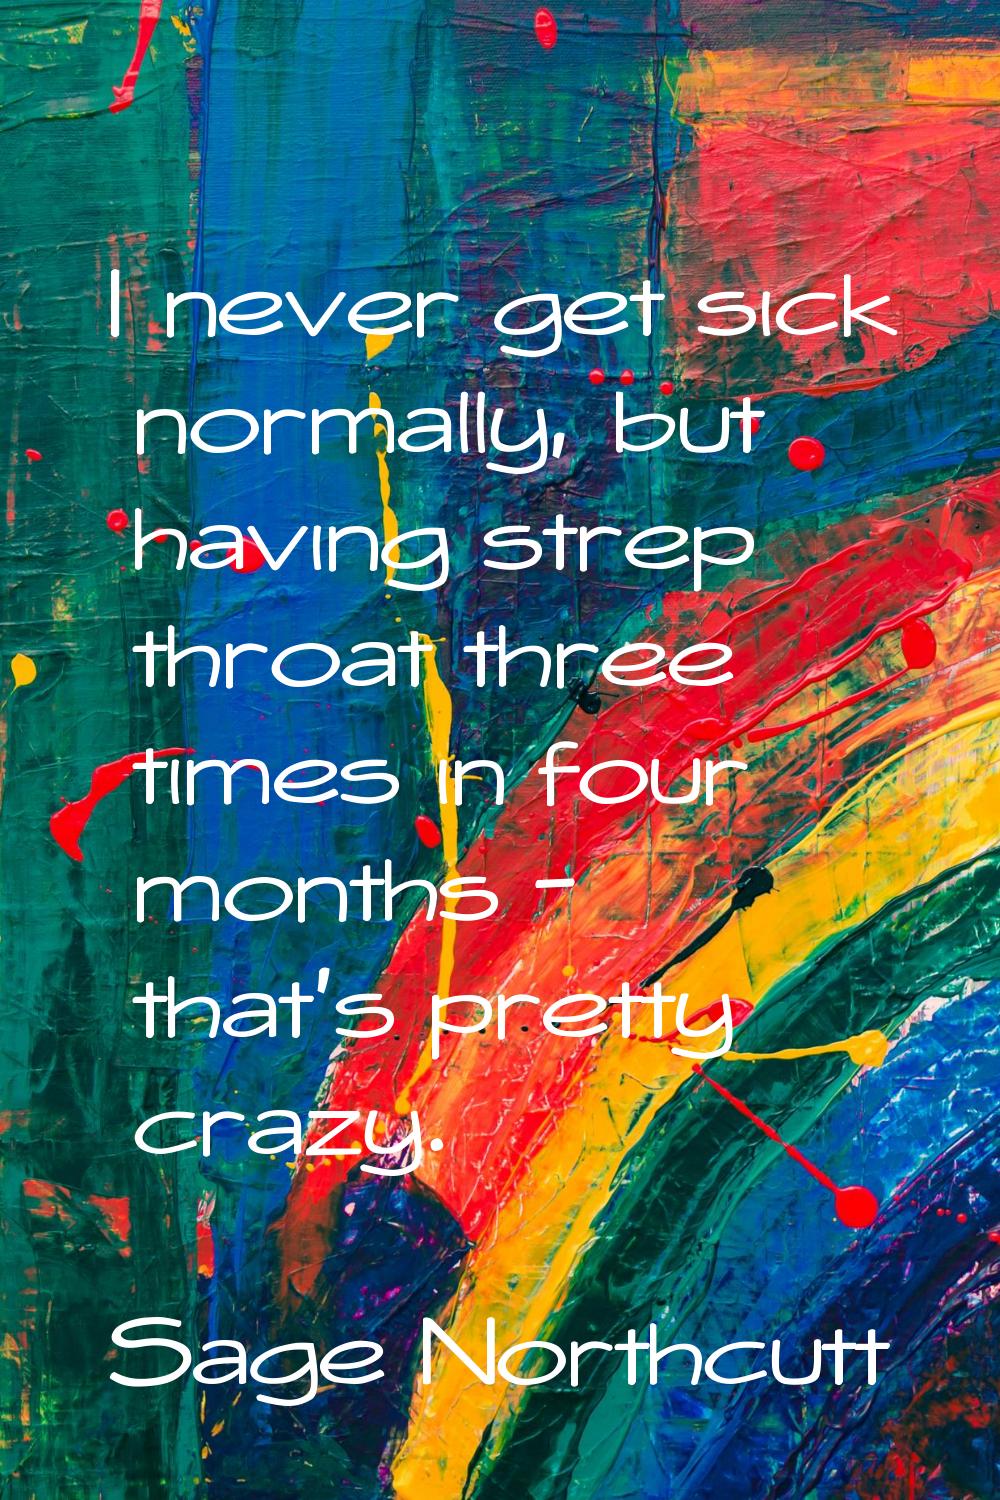 I never get sick normally, but having strep throat three times in four months - that's pretty crazy